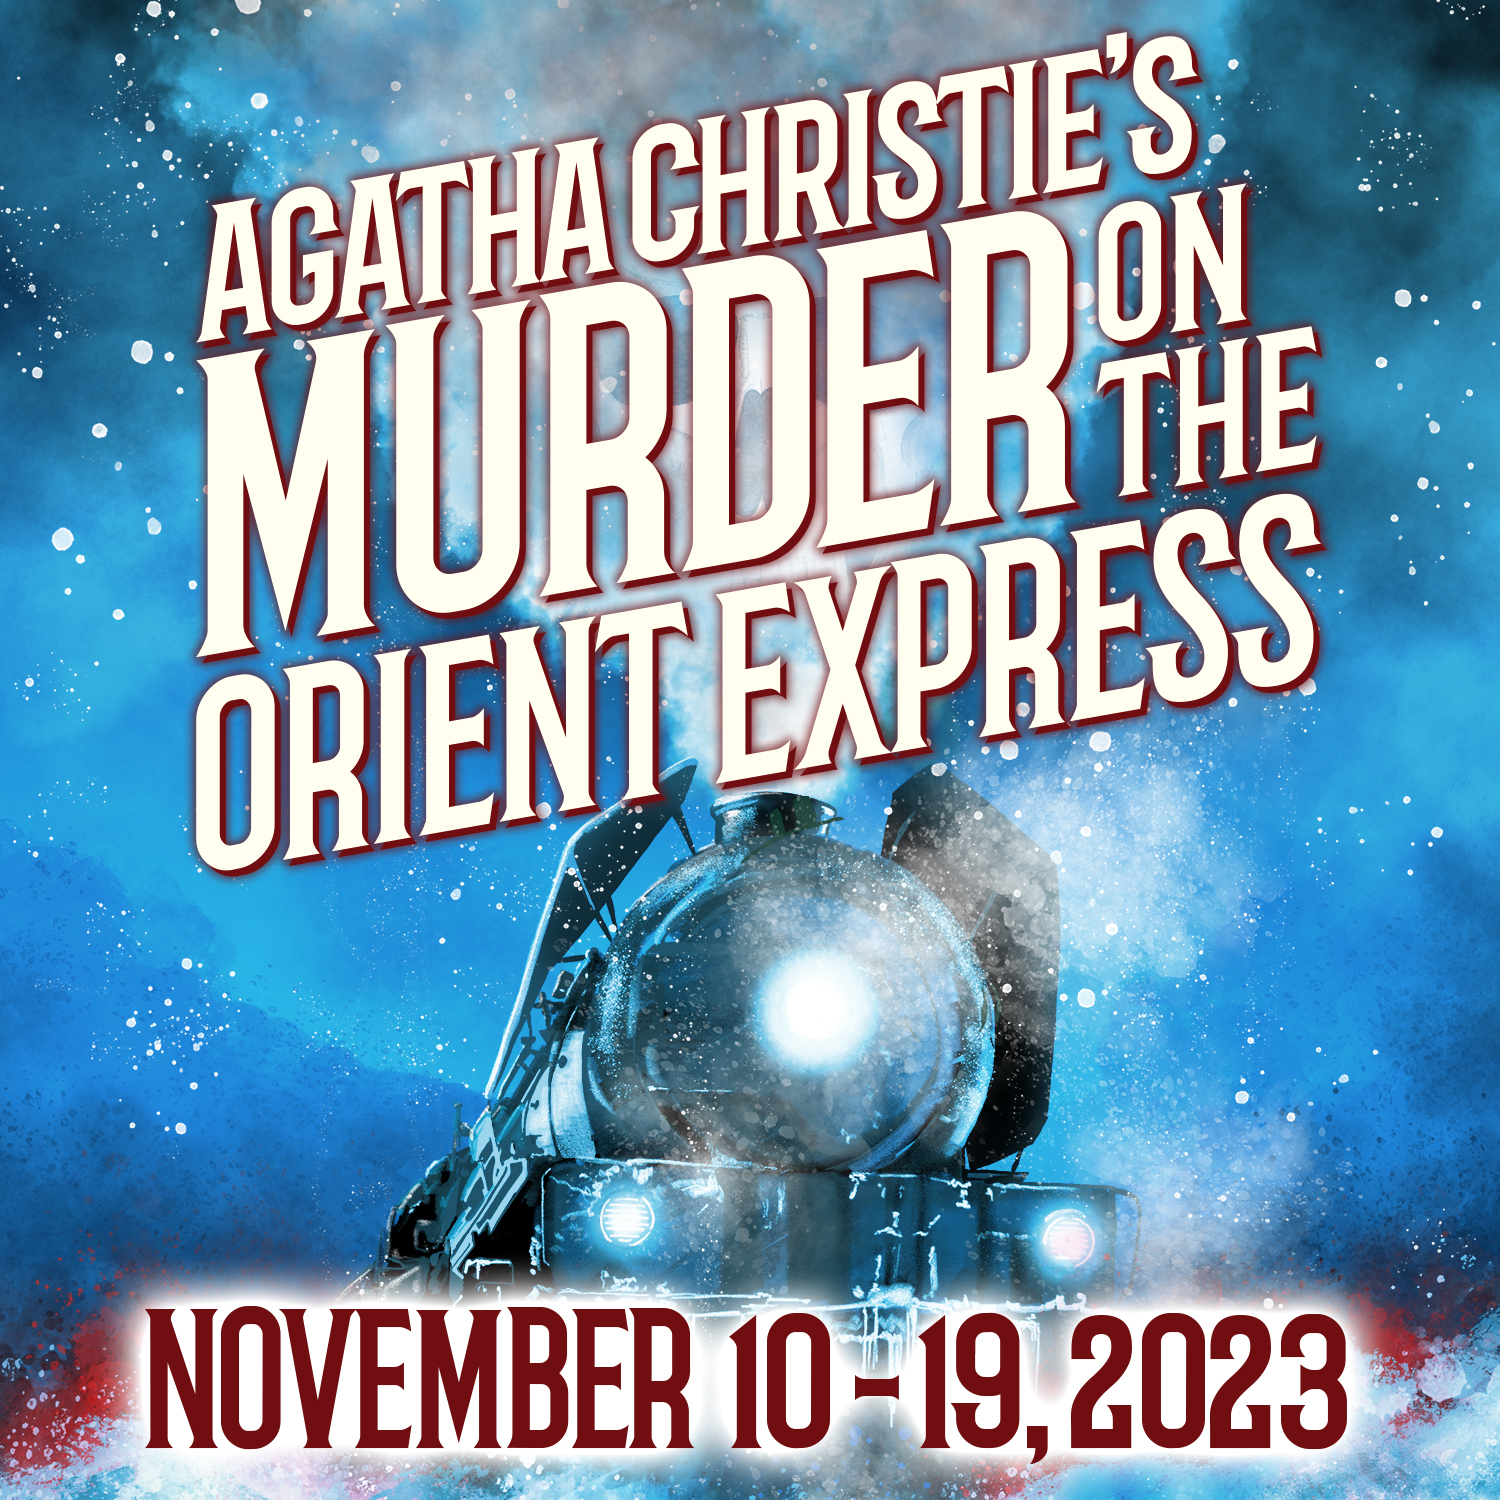 Agatha Christie's Murder on the Orient Express, Adapted by Ken Ludwig, Directed by Frank Mihelich opens Nov. 10, - 19, 2023